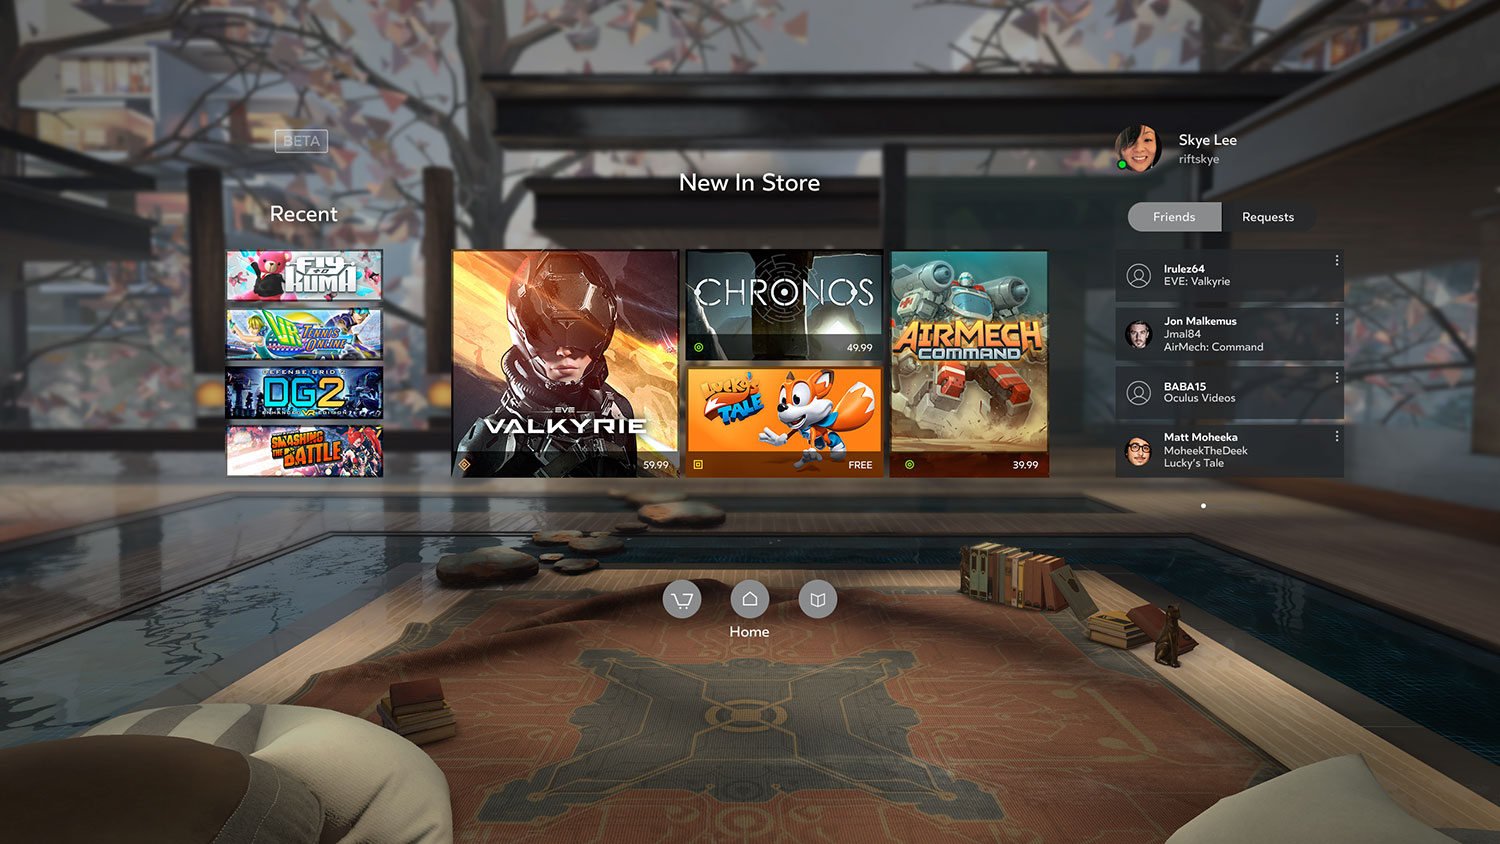 Oculus Rift Owners Can Launch SteamVR Games From Oculus | Digital Trends